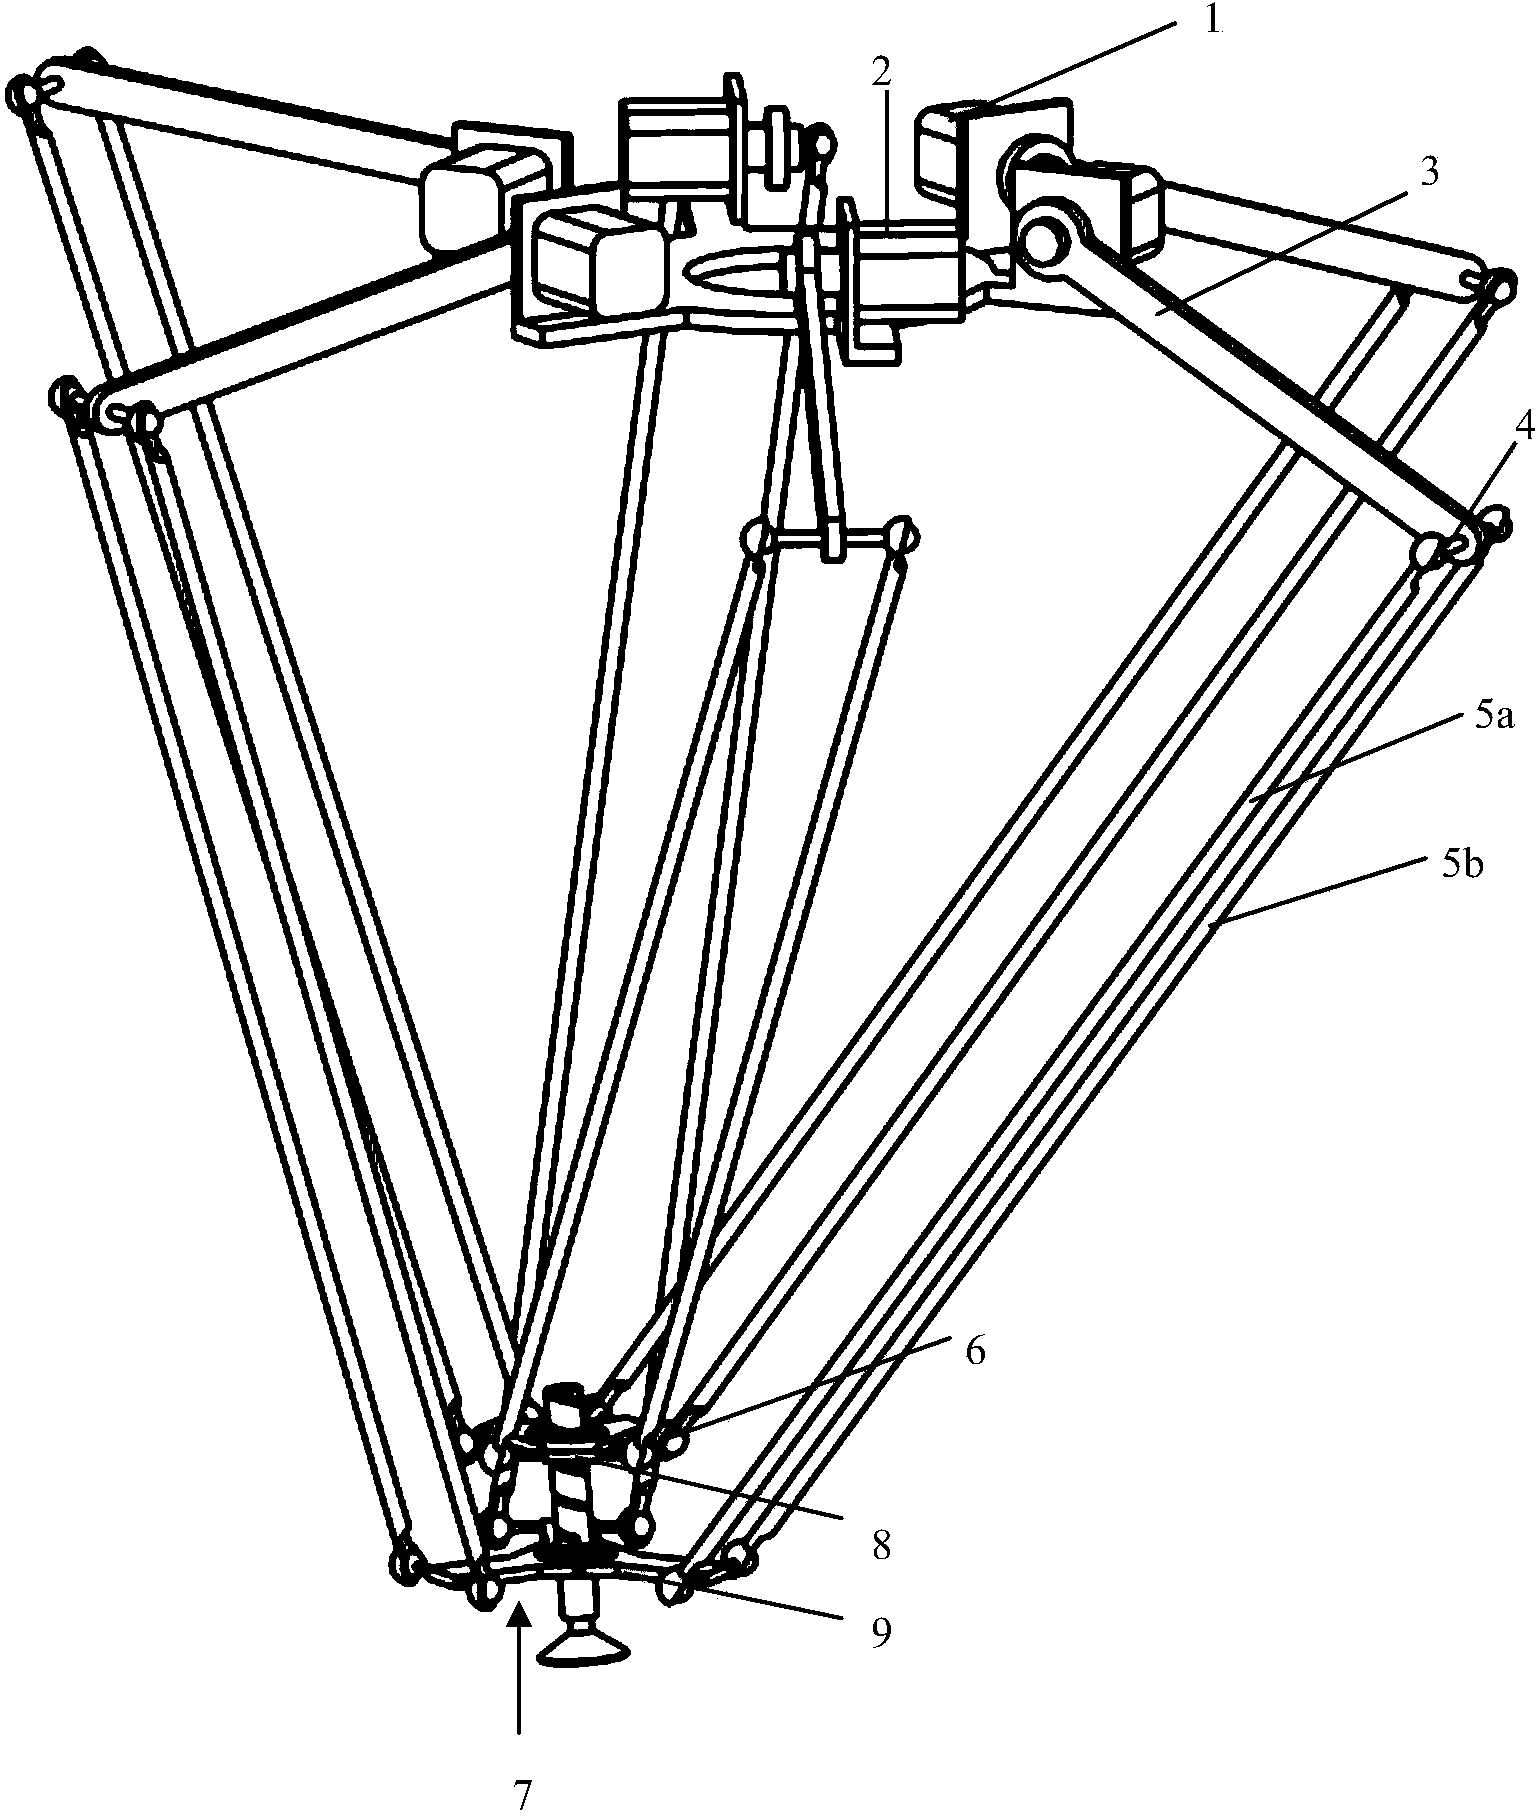 High-speed parallel manipulator with six degrees of freedom